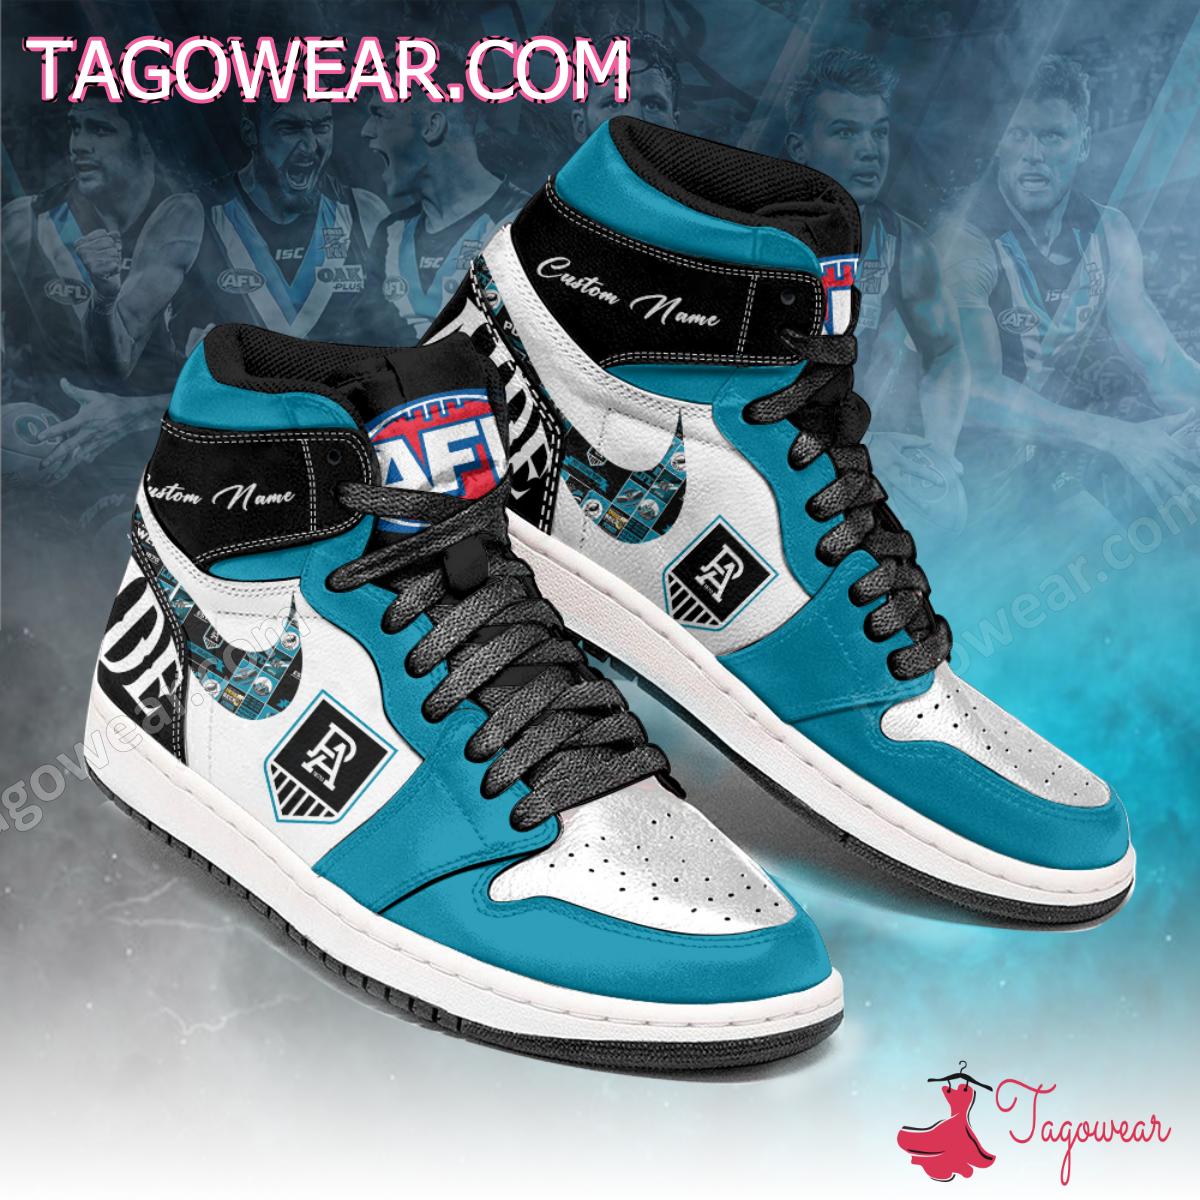 Port Adelaide Football Club Afl Personalize Air Jordan High Top Shoes a